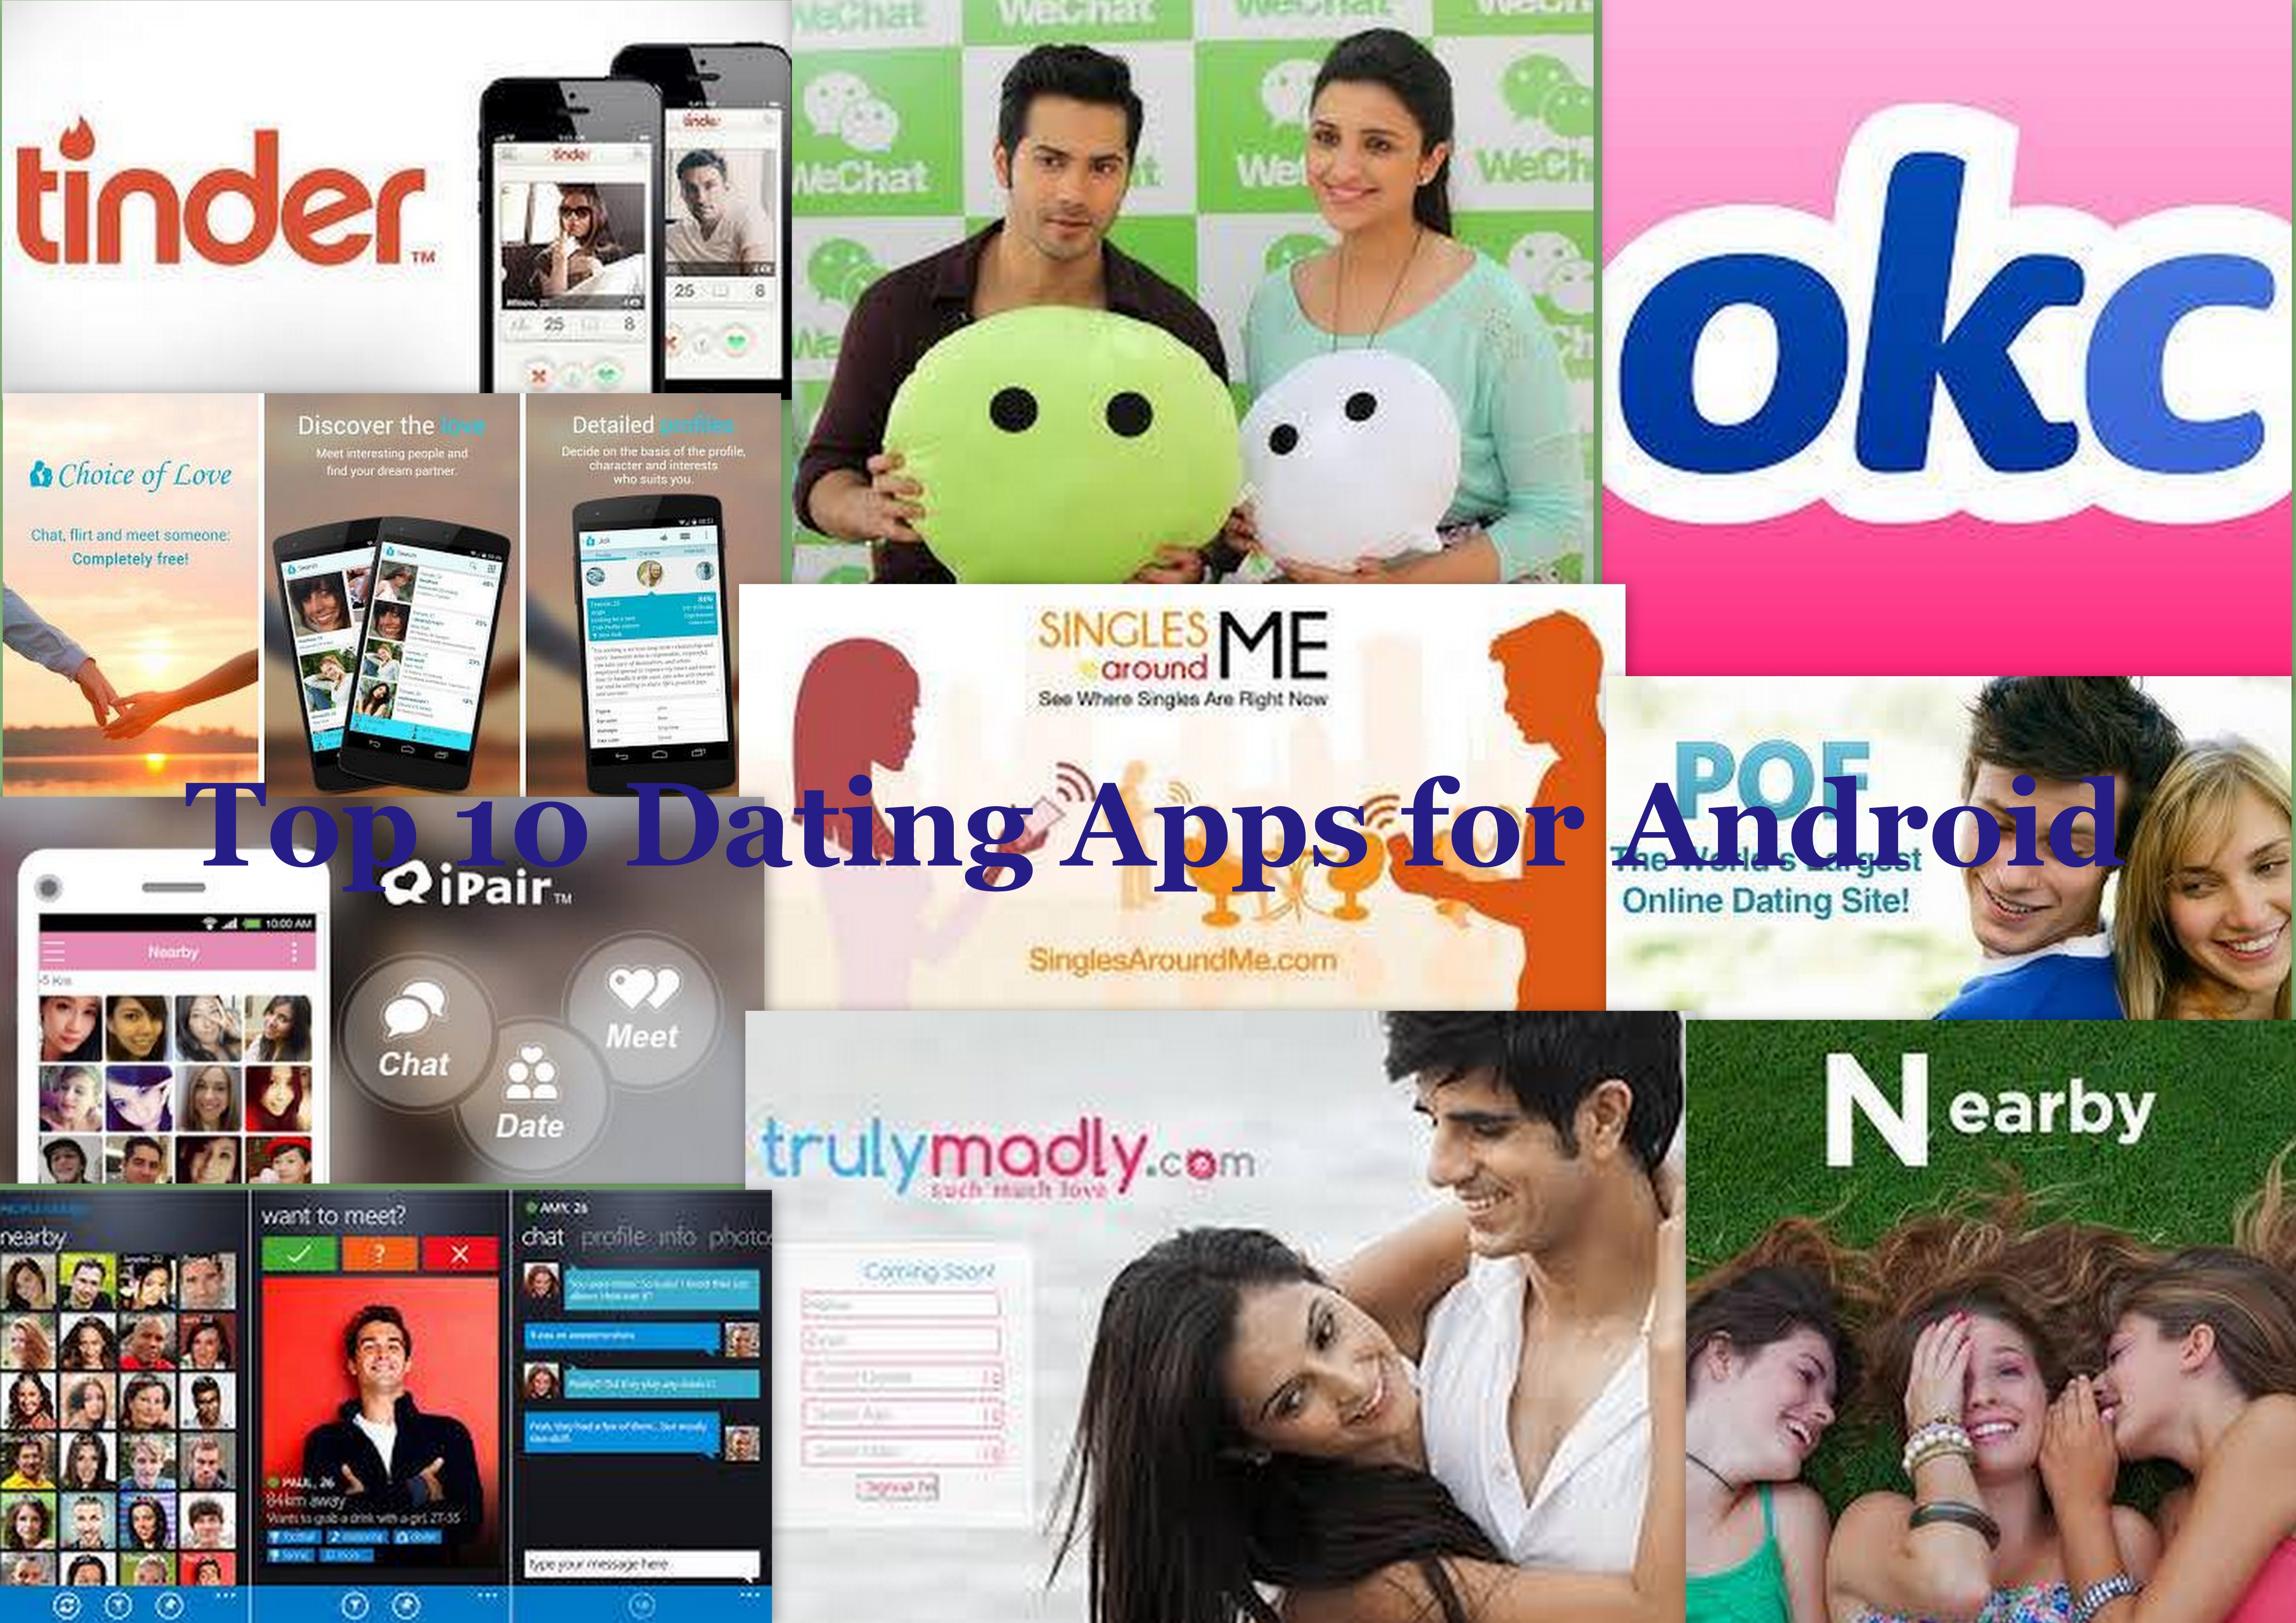 Top 10 Dating Apps for Android